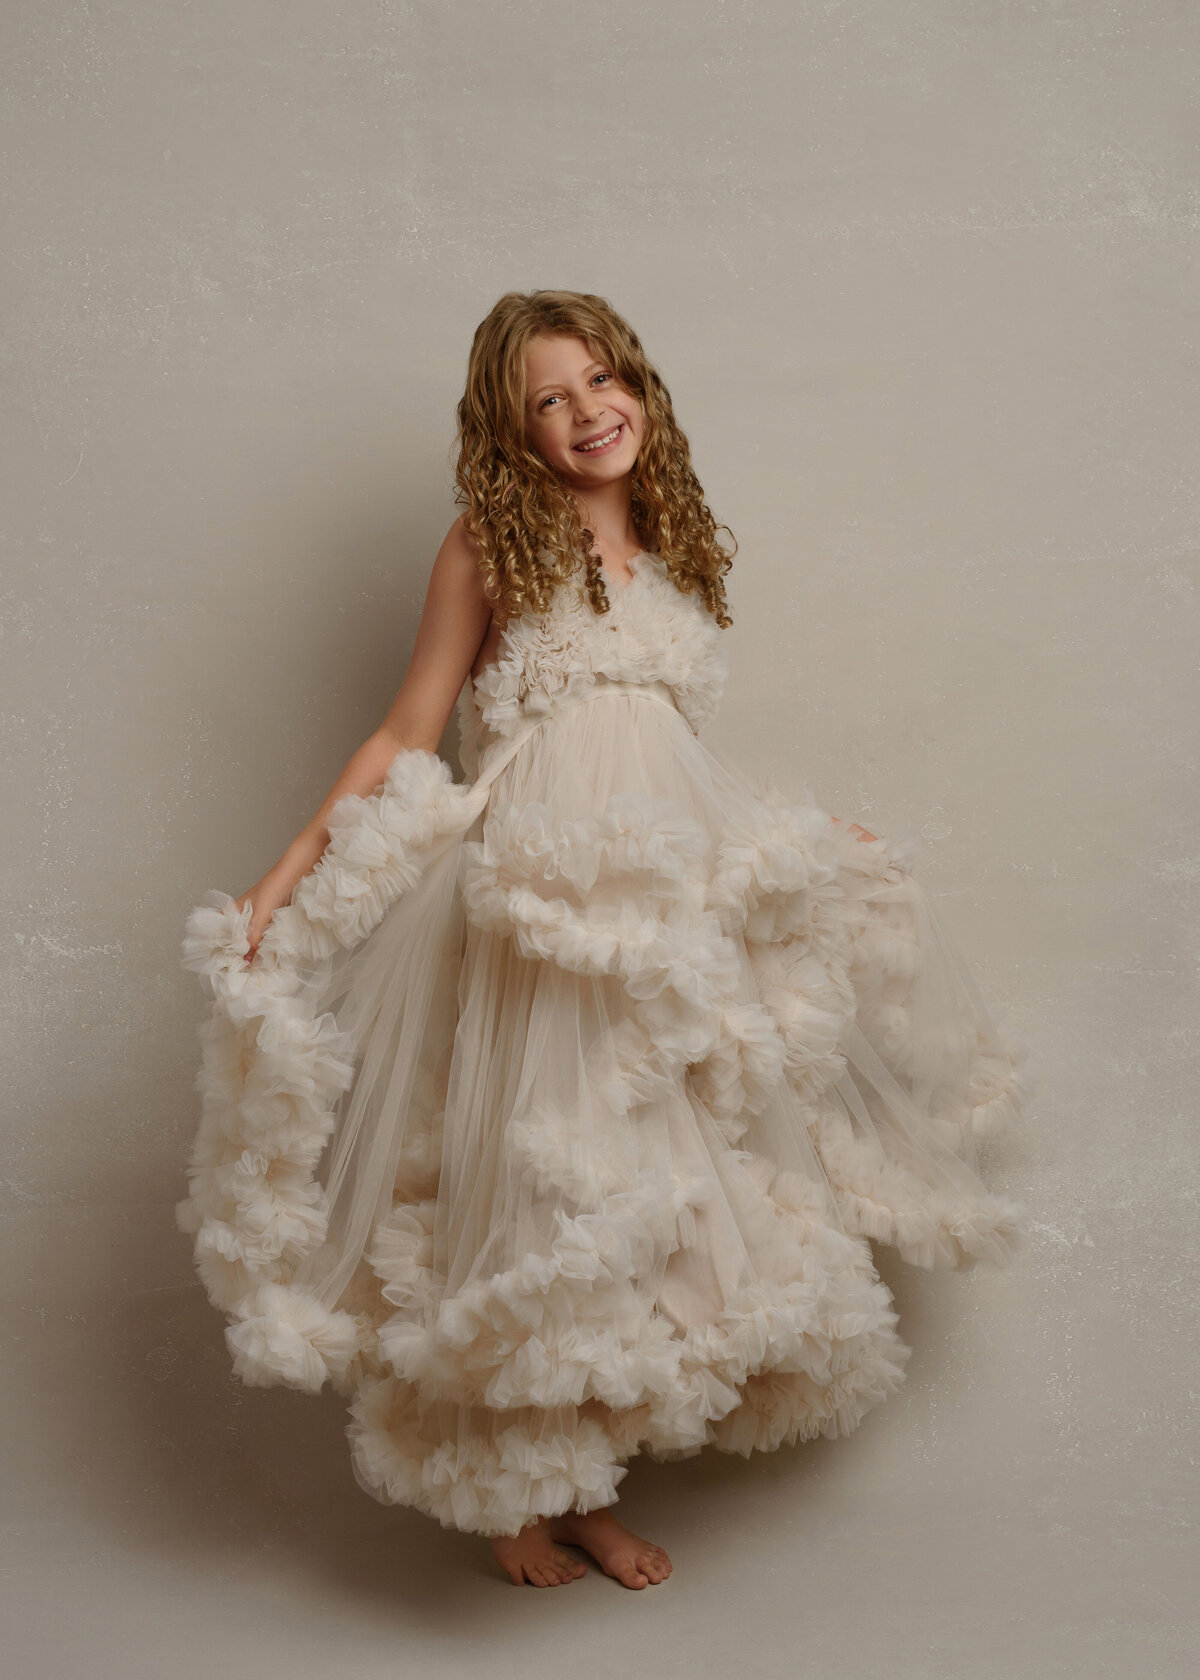 fine art child standing in studio couture gown